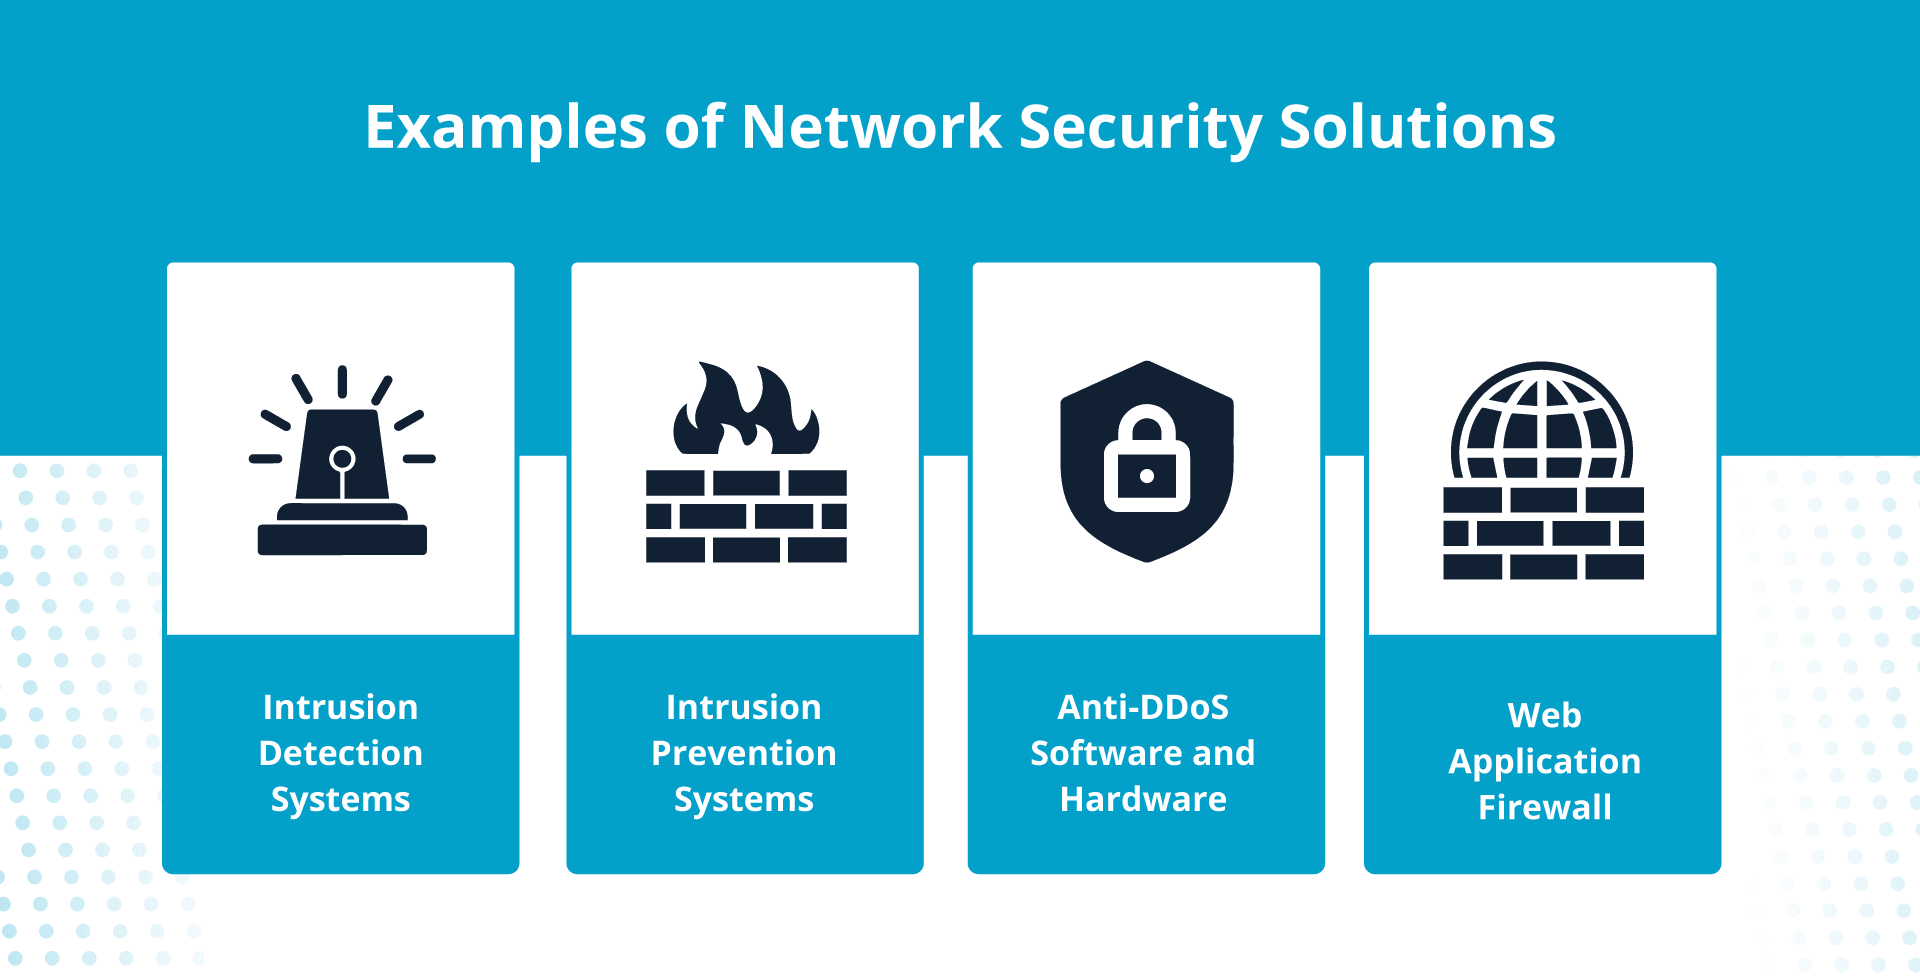 Top-tier examples of network security solutions.